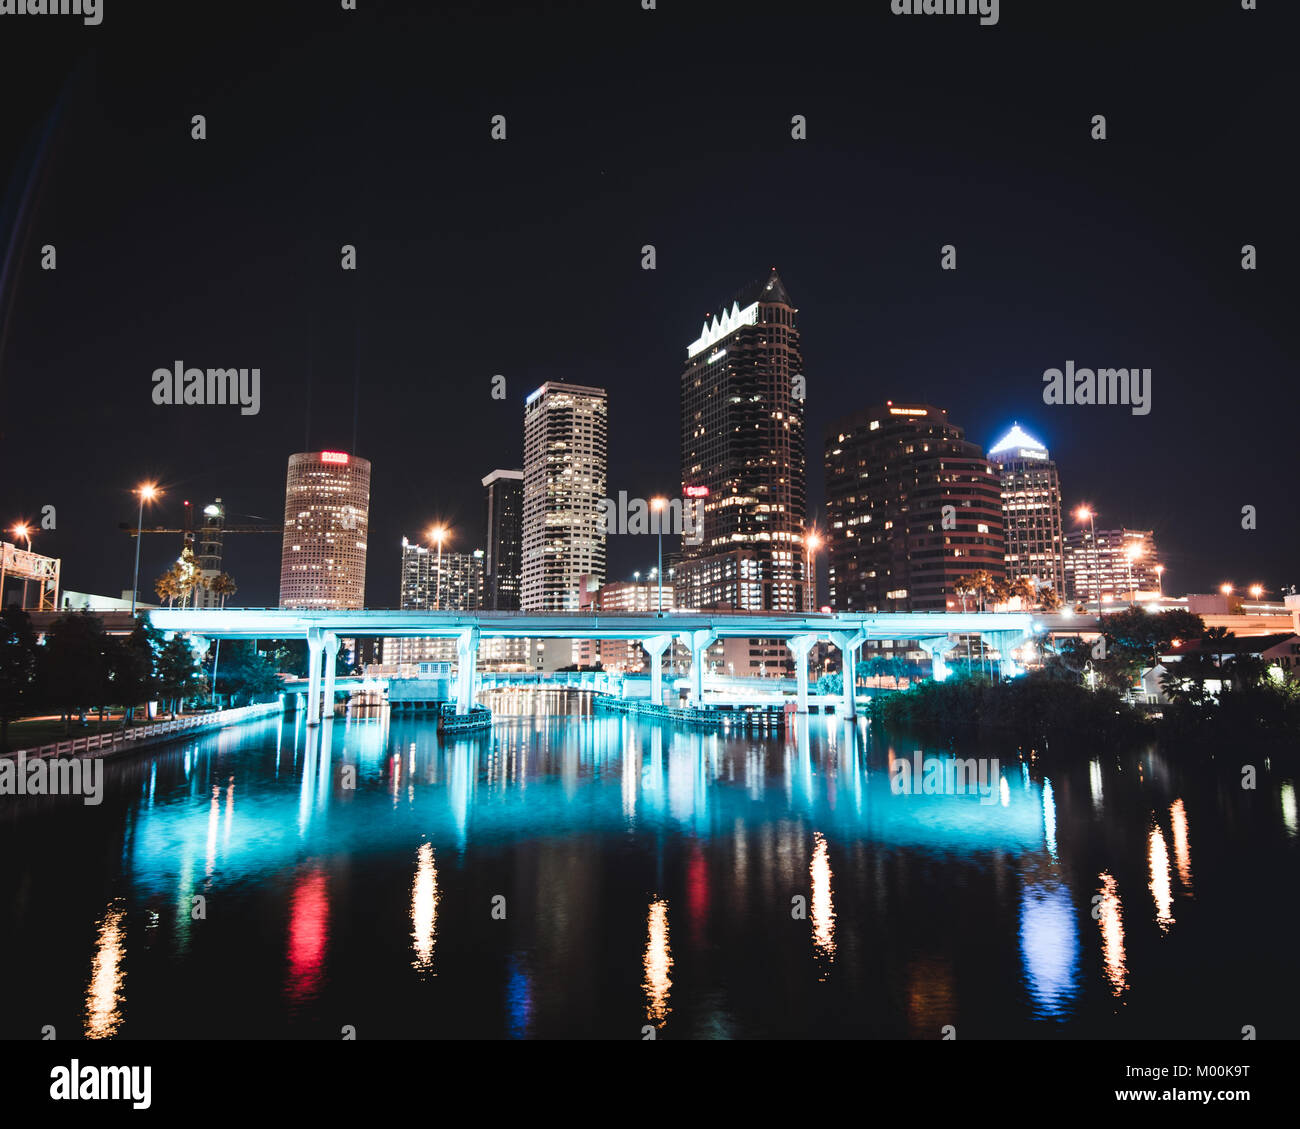 Tampa Skyline with long exposure Stock Photo